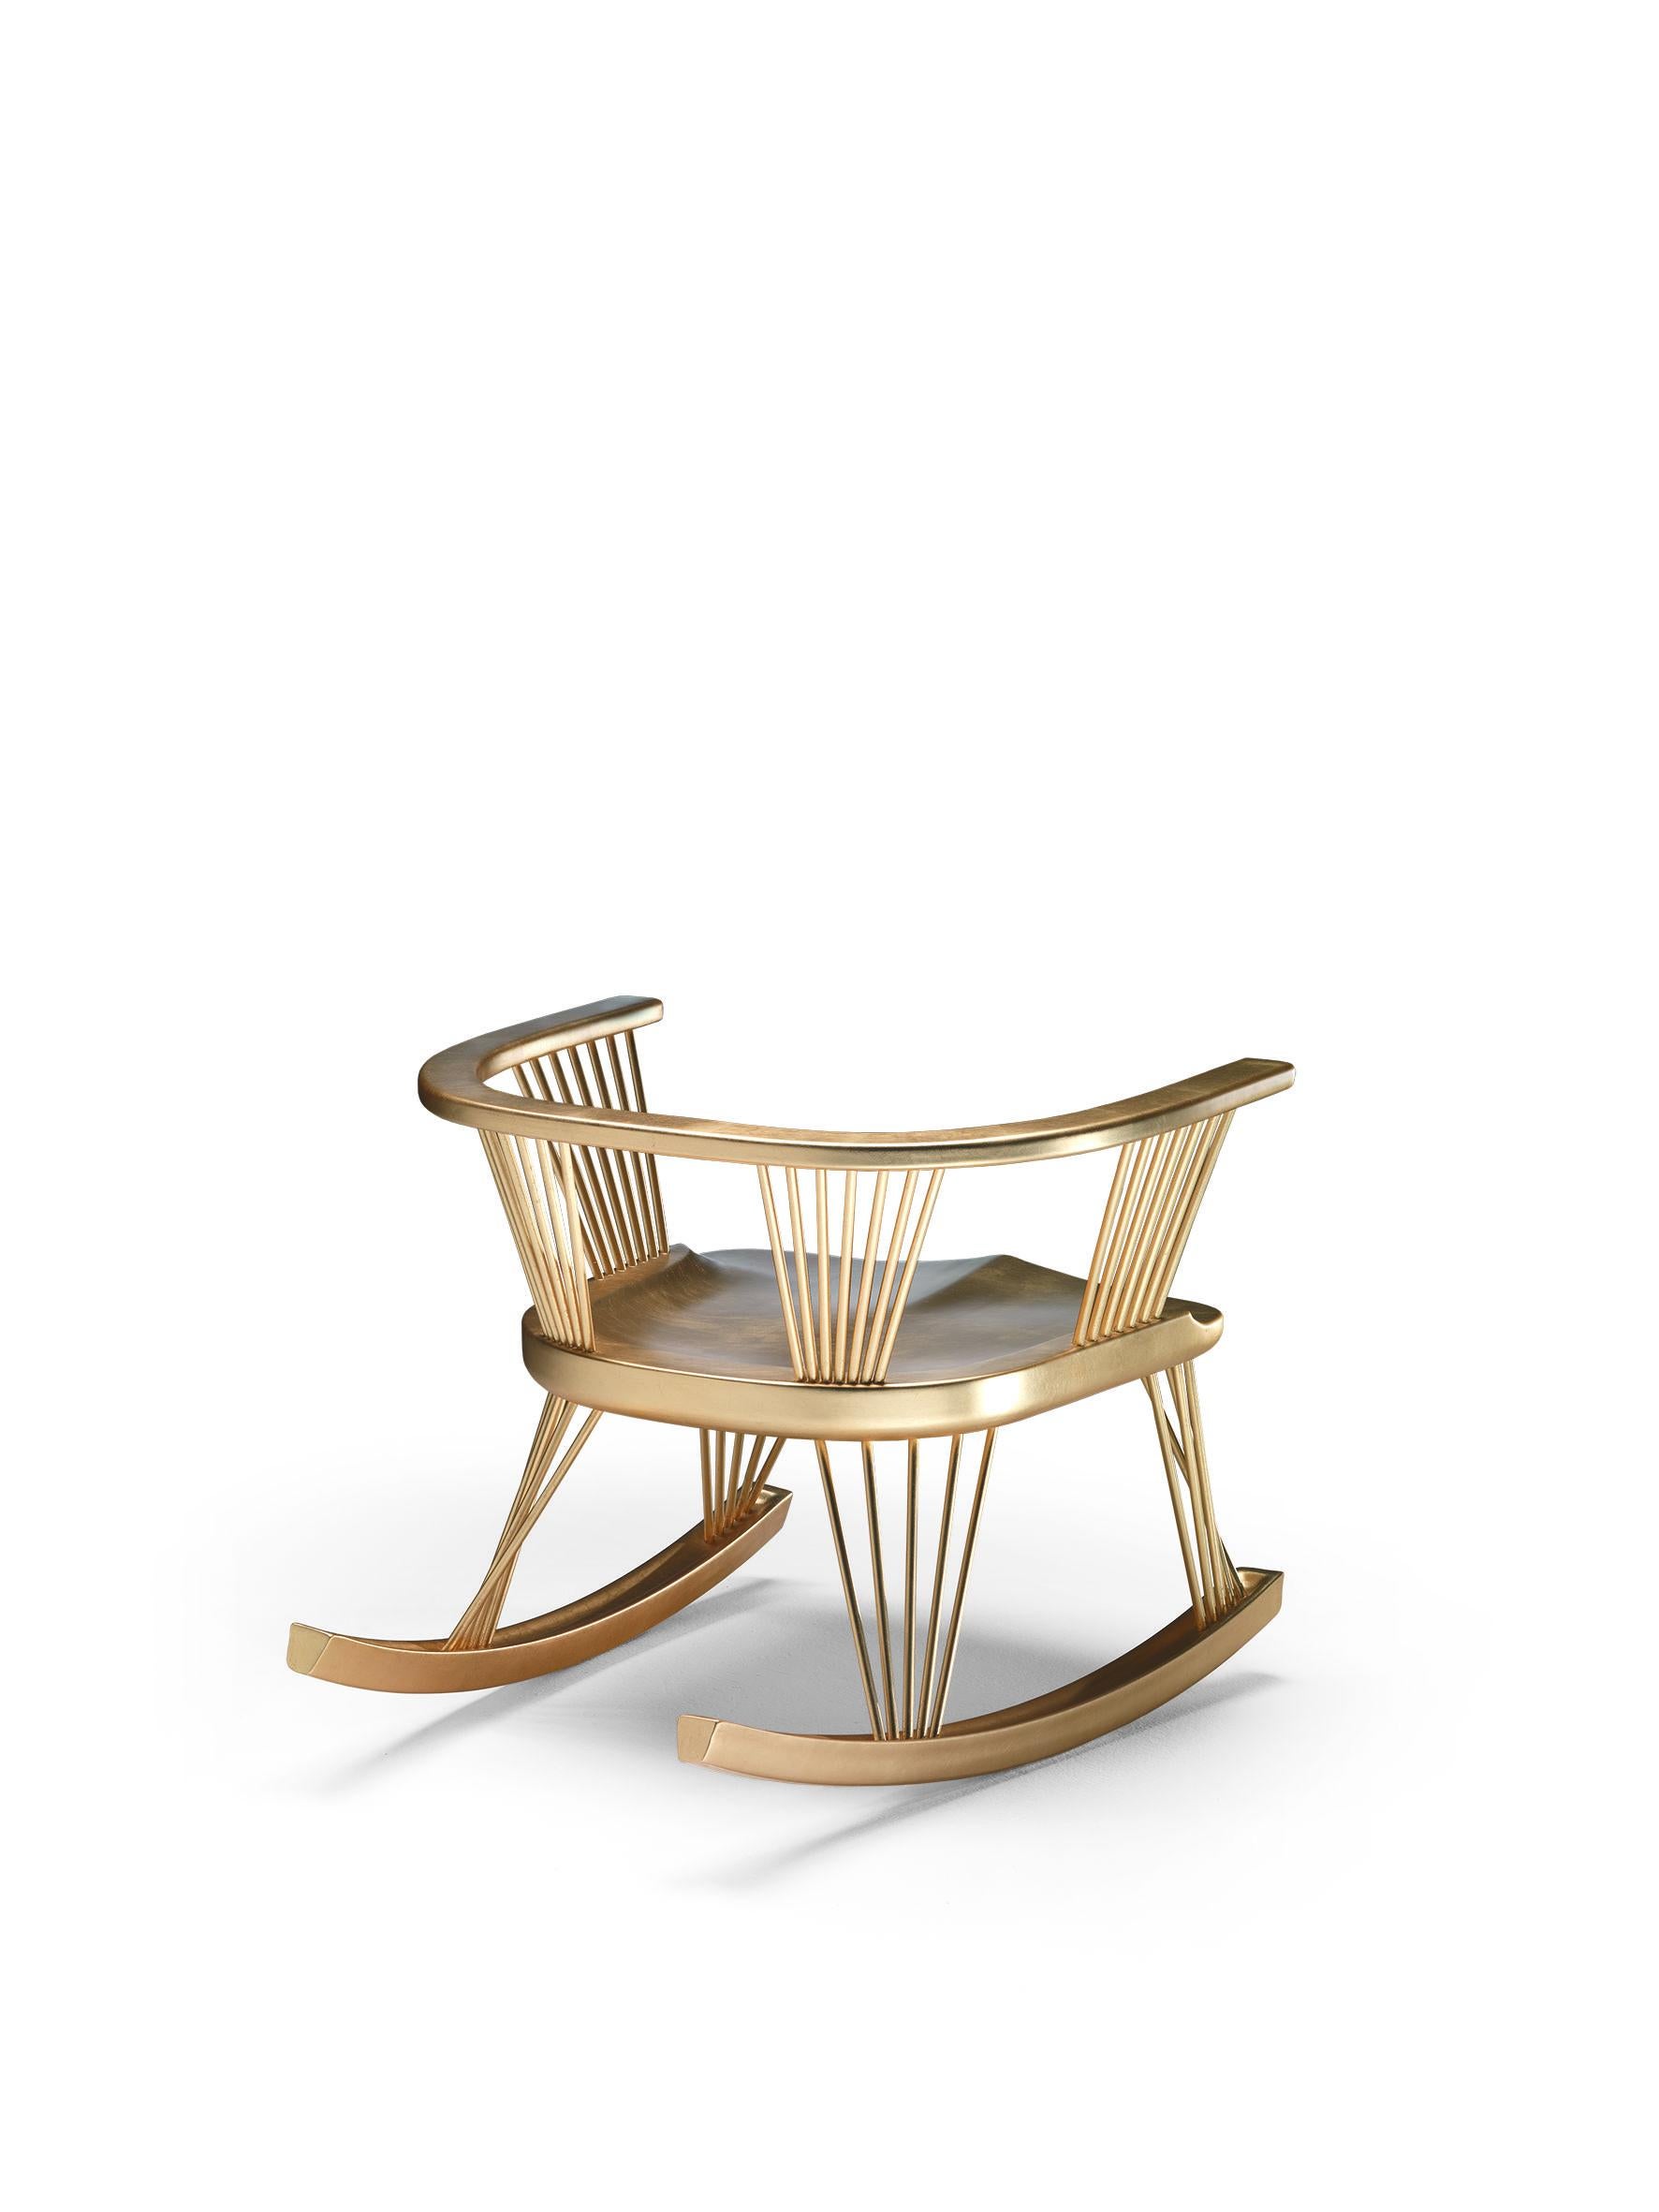 SITLALI Low Rocking Chair in Solid Wood and Thin Overlapping Road and Gold Leaf For Sale 2